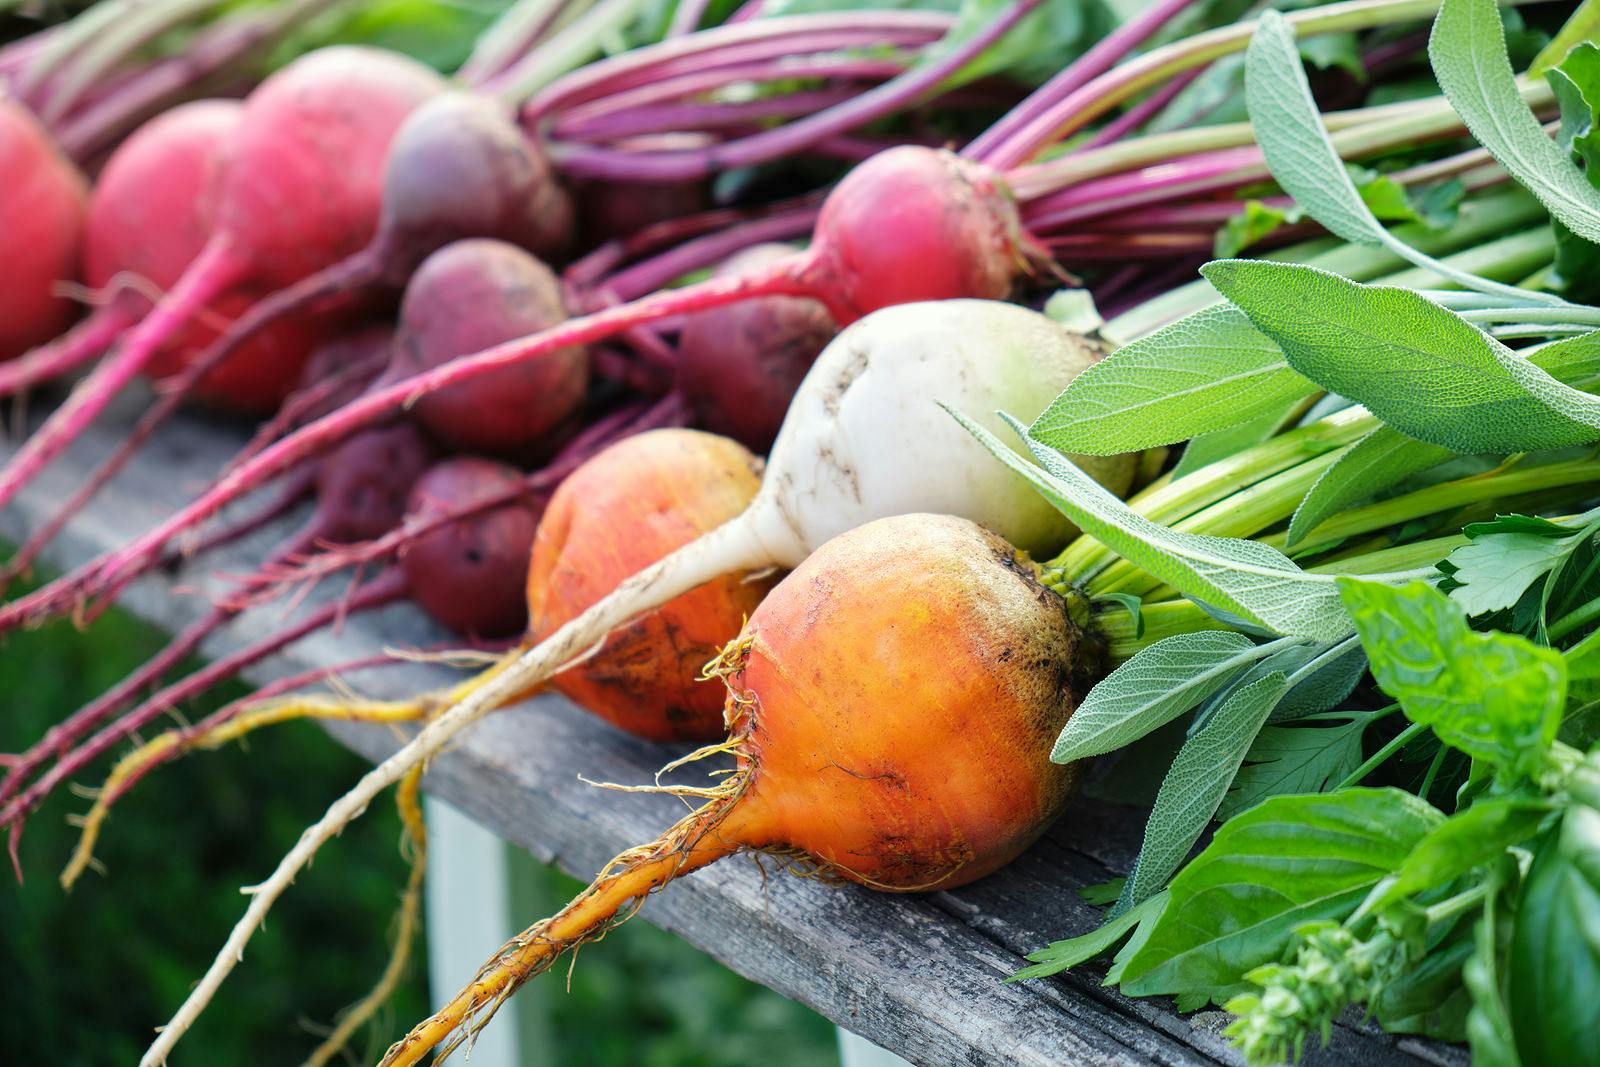 will colorful fresh beets benefit eyesight?